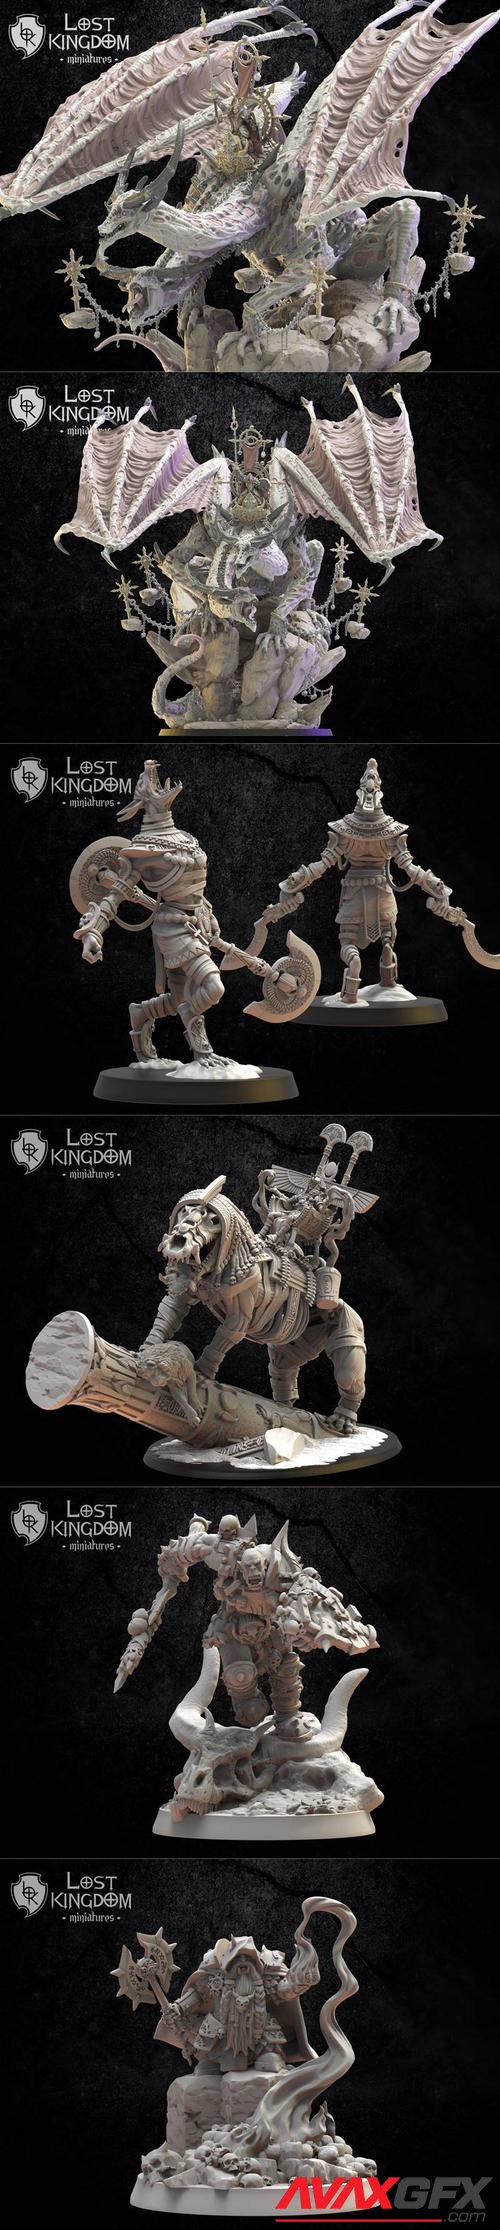 Lost Kingdom Miniatures - Wecome pack February 2022 – 3D Printable STL